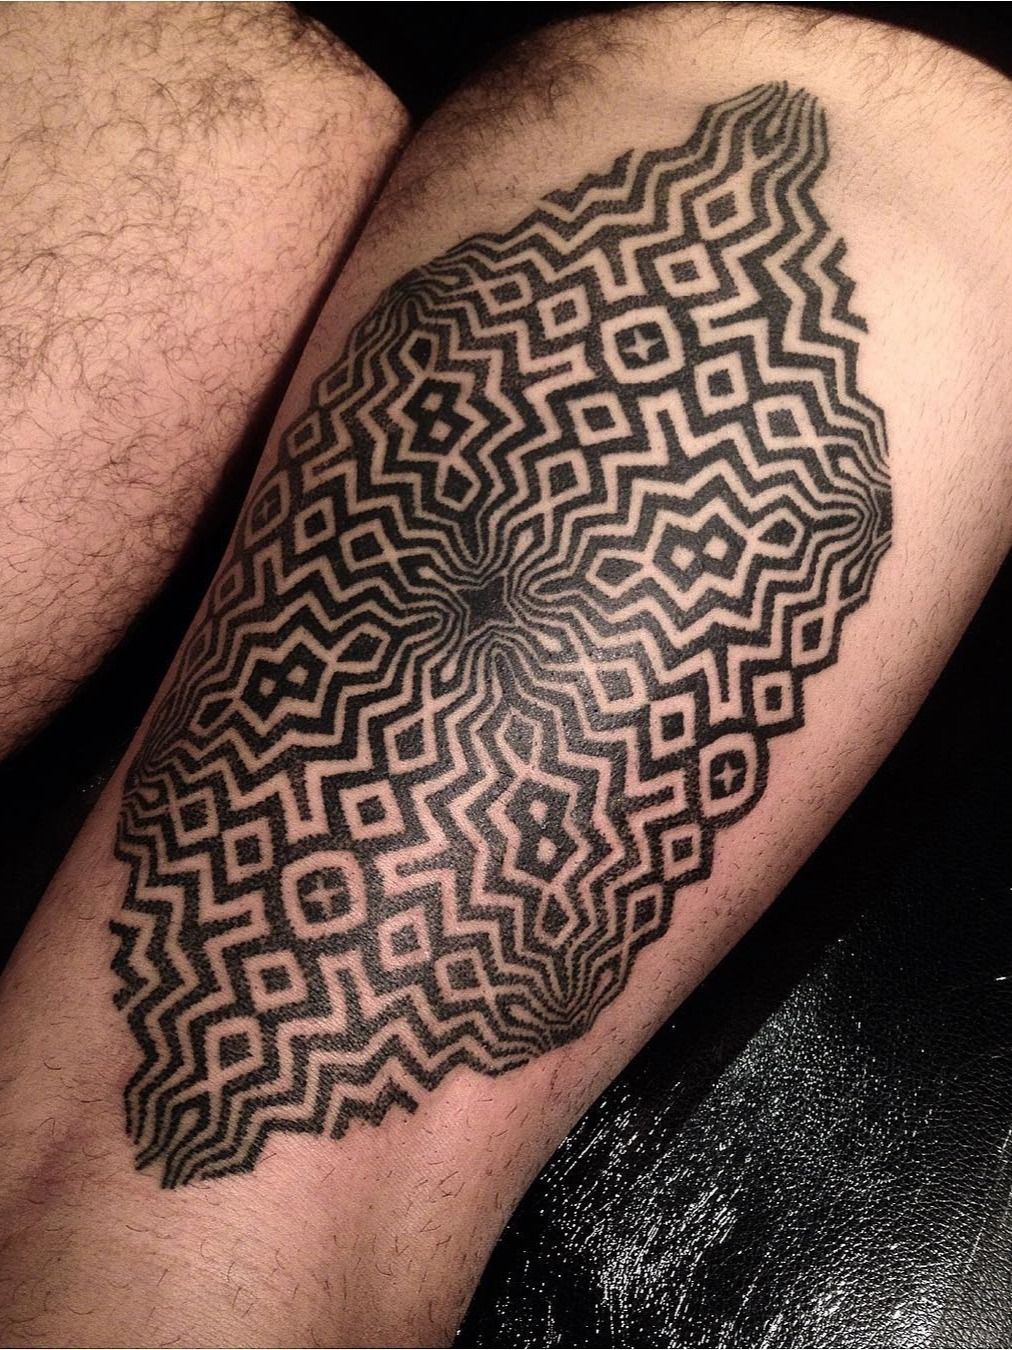 A Conversation with Four UpandComing Stick and Poke Tattoo Artists